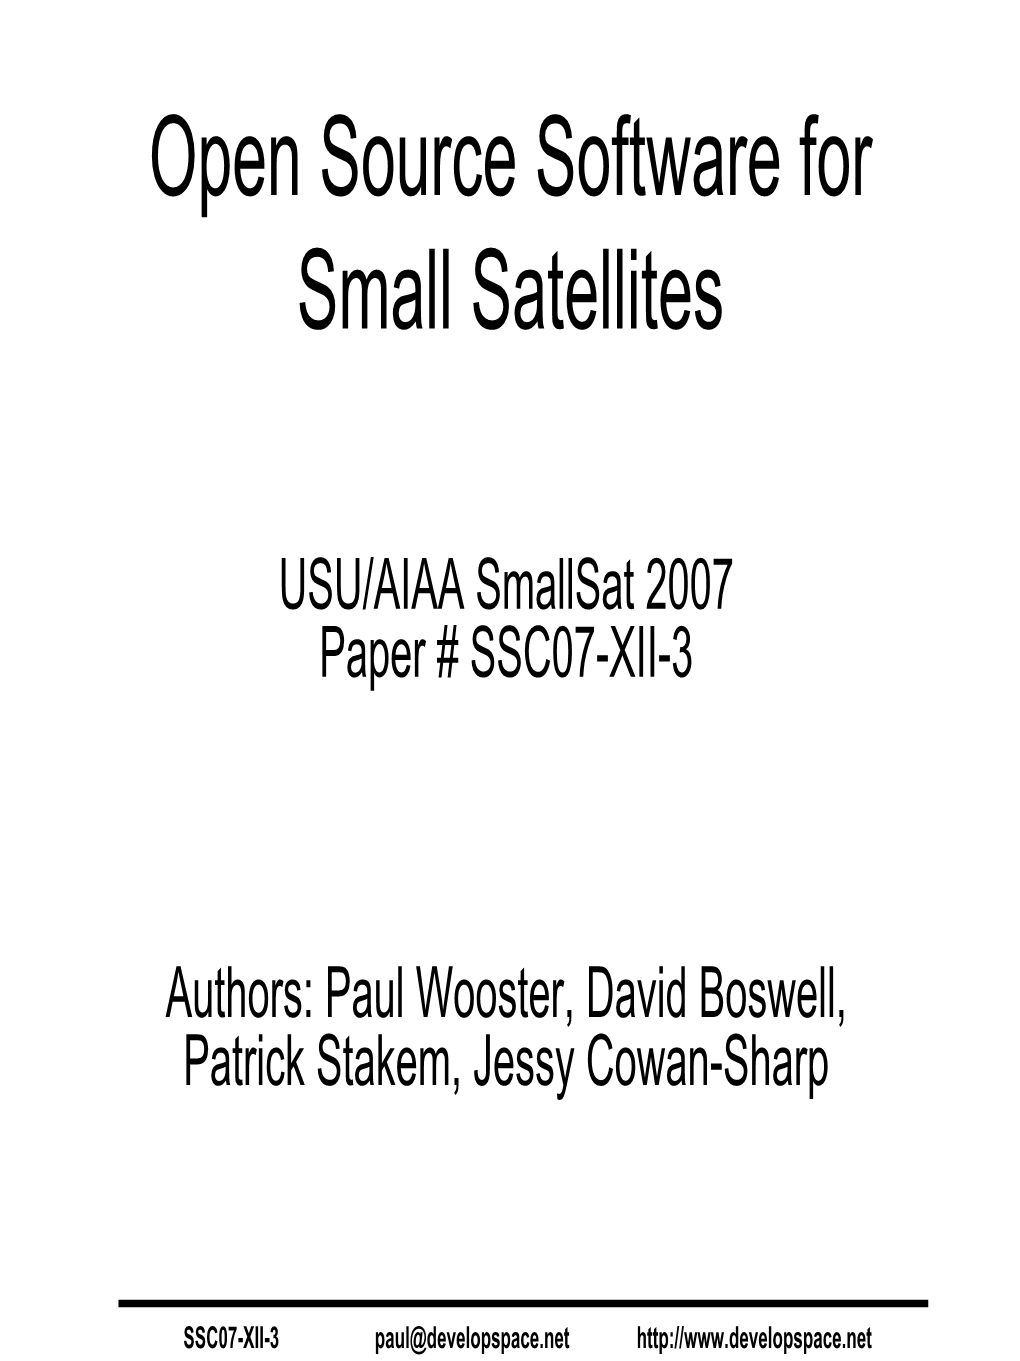 Open Source Software for Small Satellites